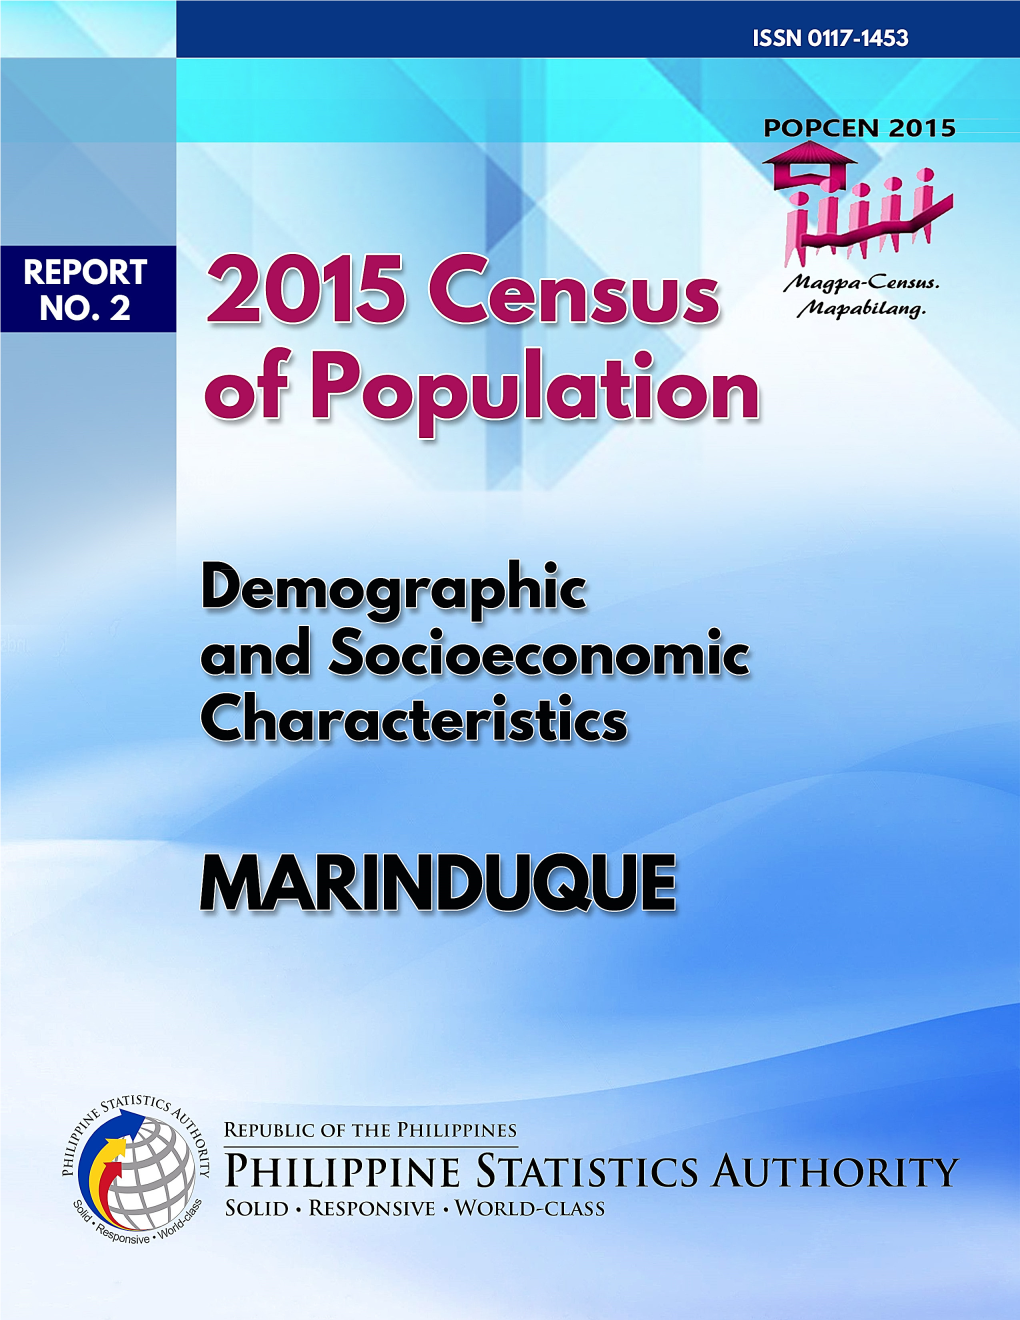 2015 Report No. 2 Was One of the Publications Prepared by the Philippine Statistics Authority (PSA) to Disseminate the Results of POPCEN 2015